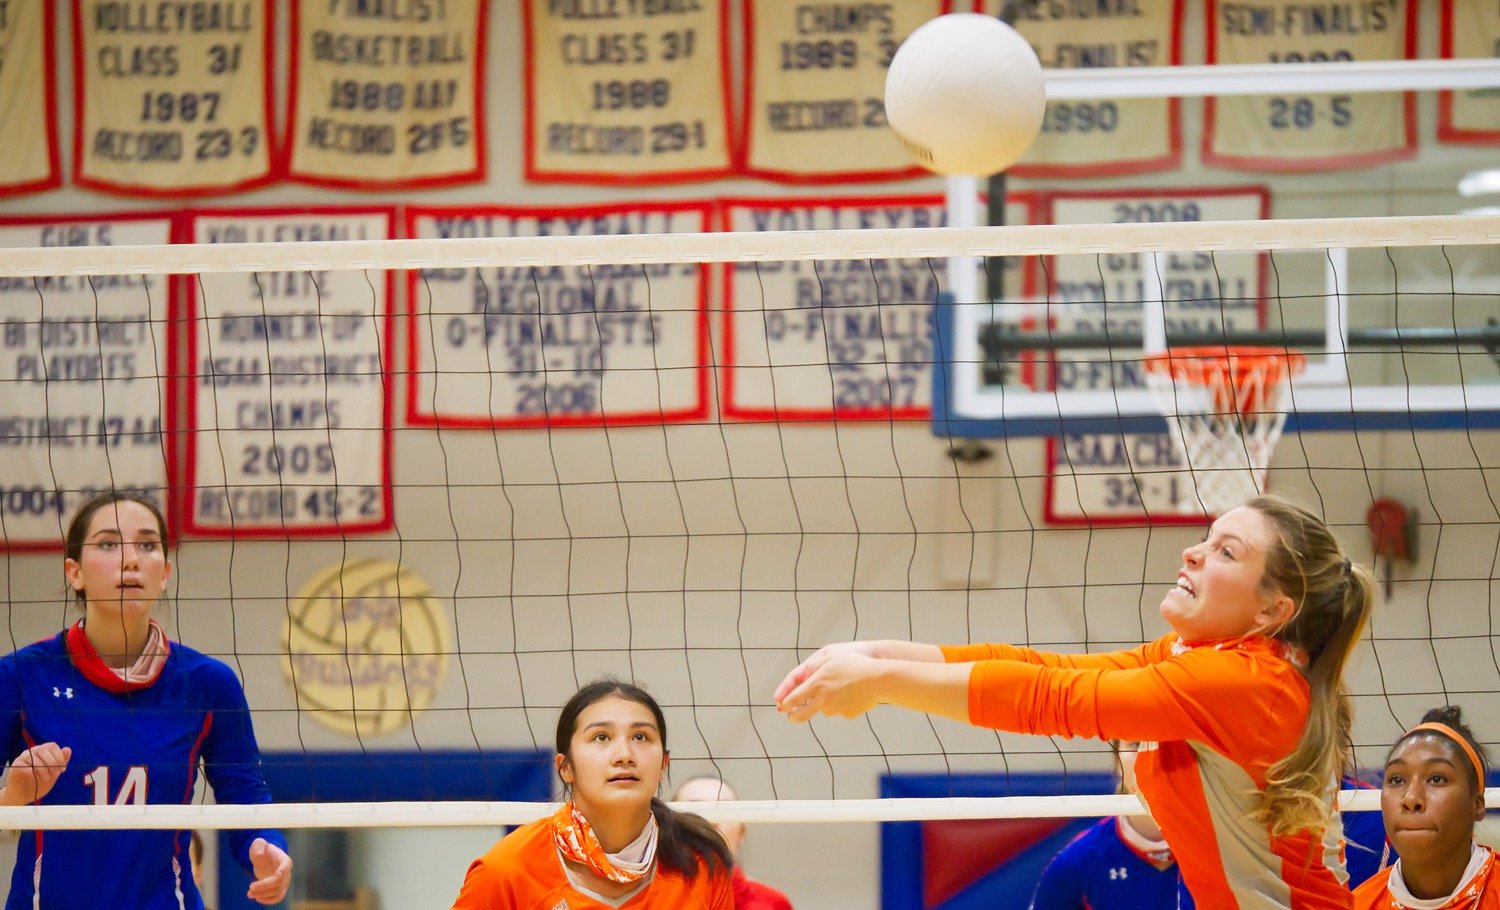 Alyssa Lankford of Mineola bumps the ball for her teammates. (Monitor photos by Sam Major)